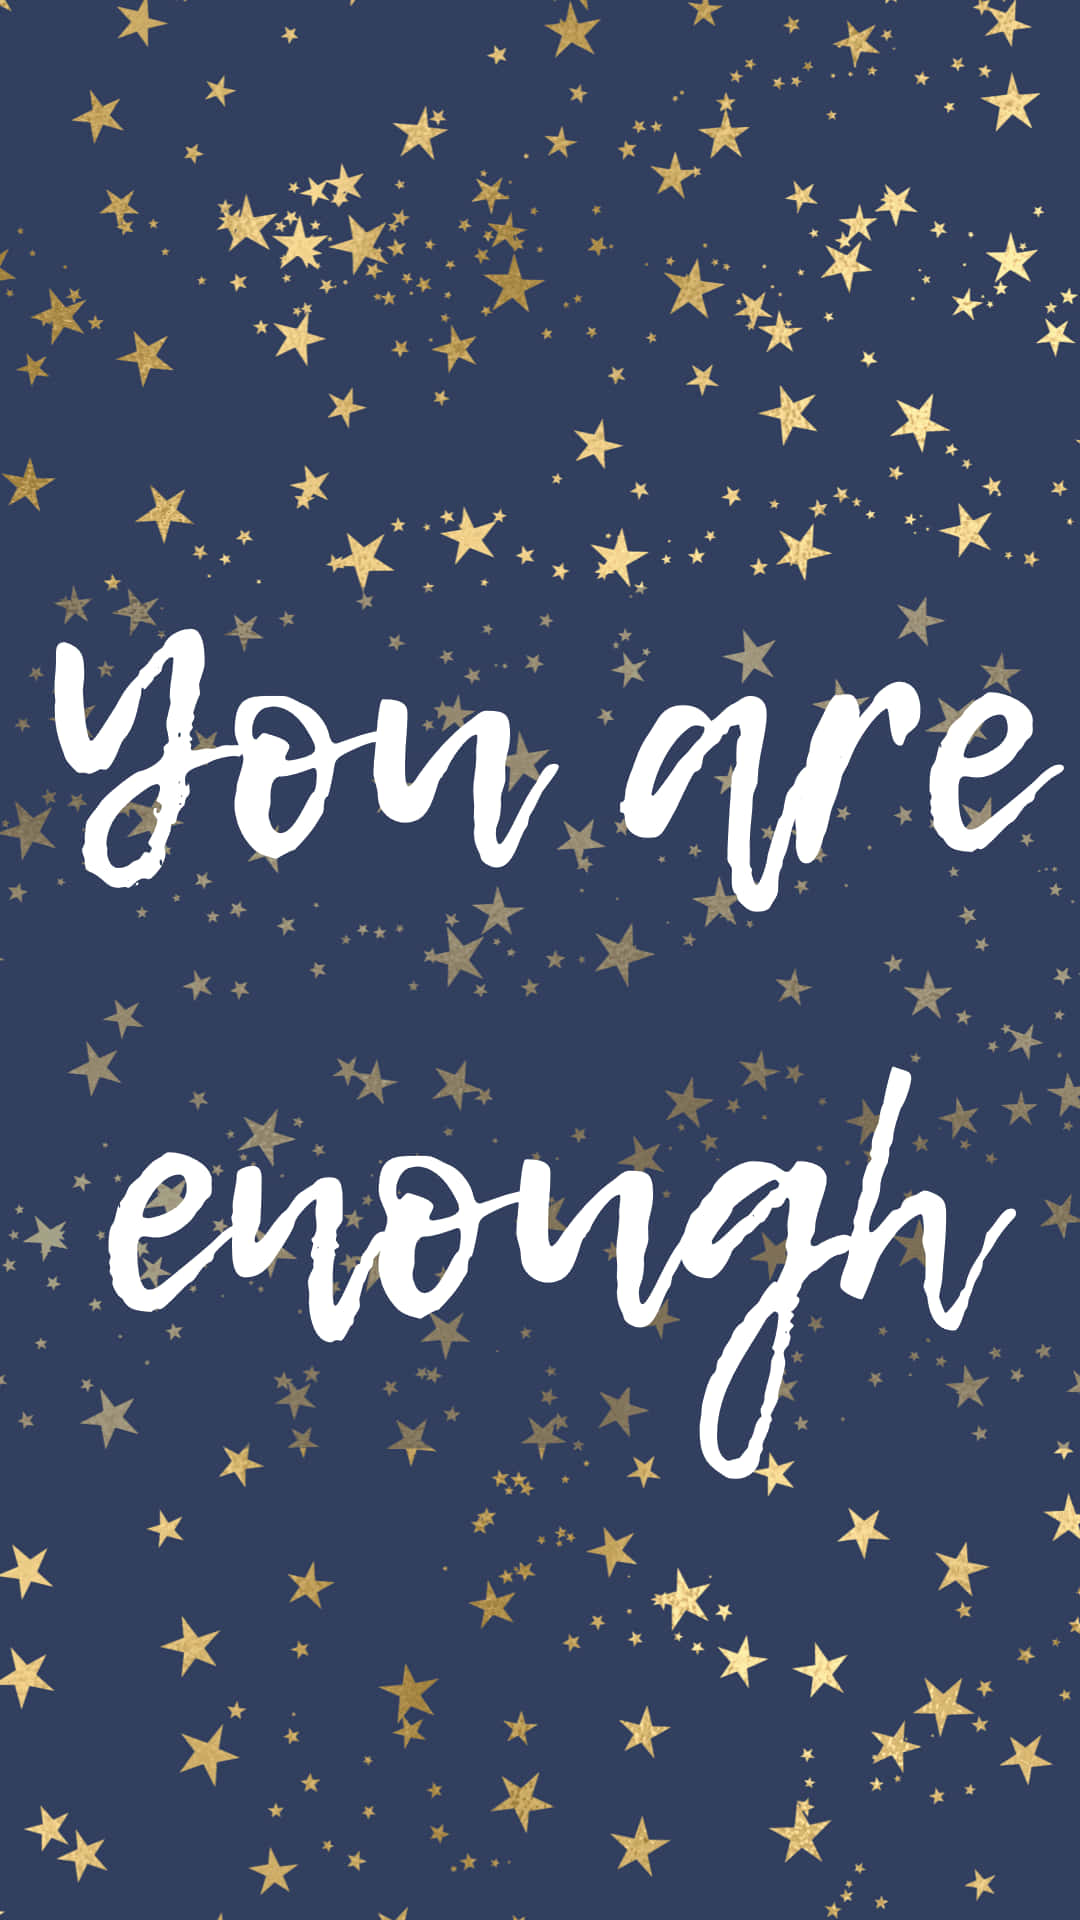 You Are Enough - Gold Stars Wallpaper